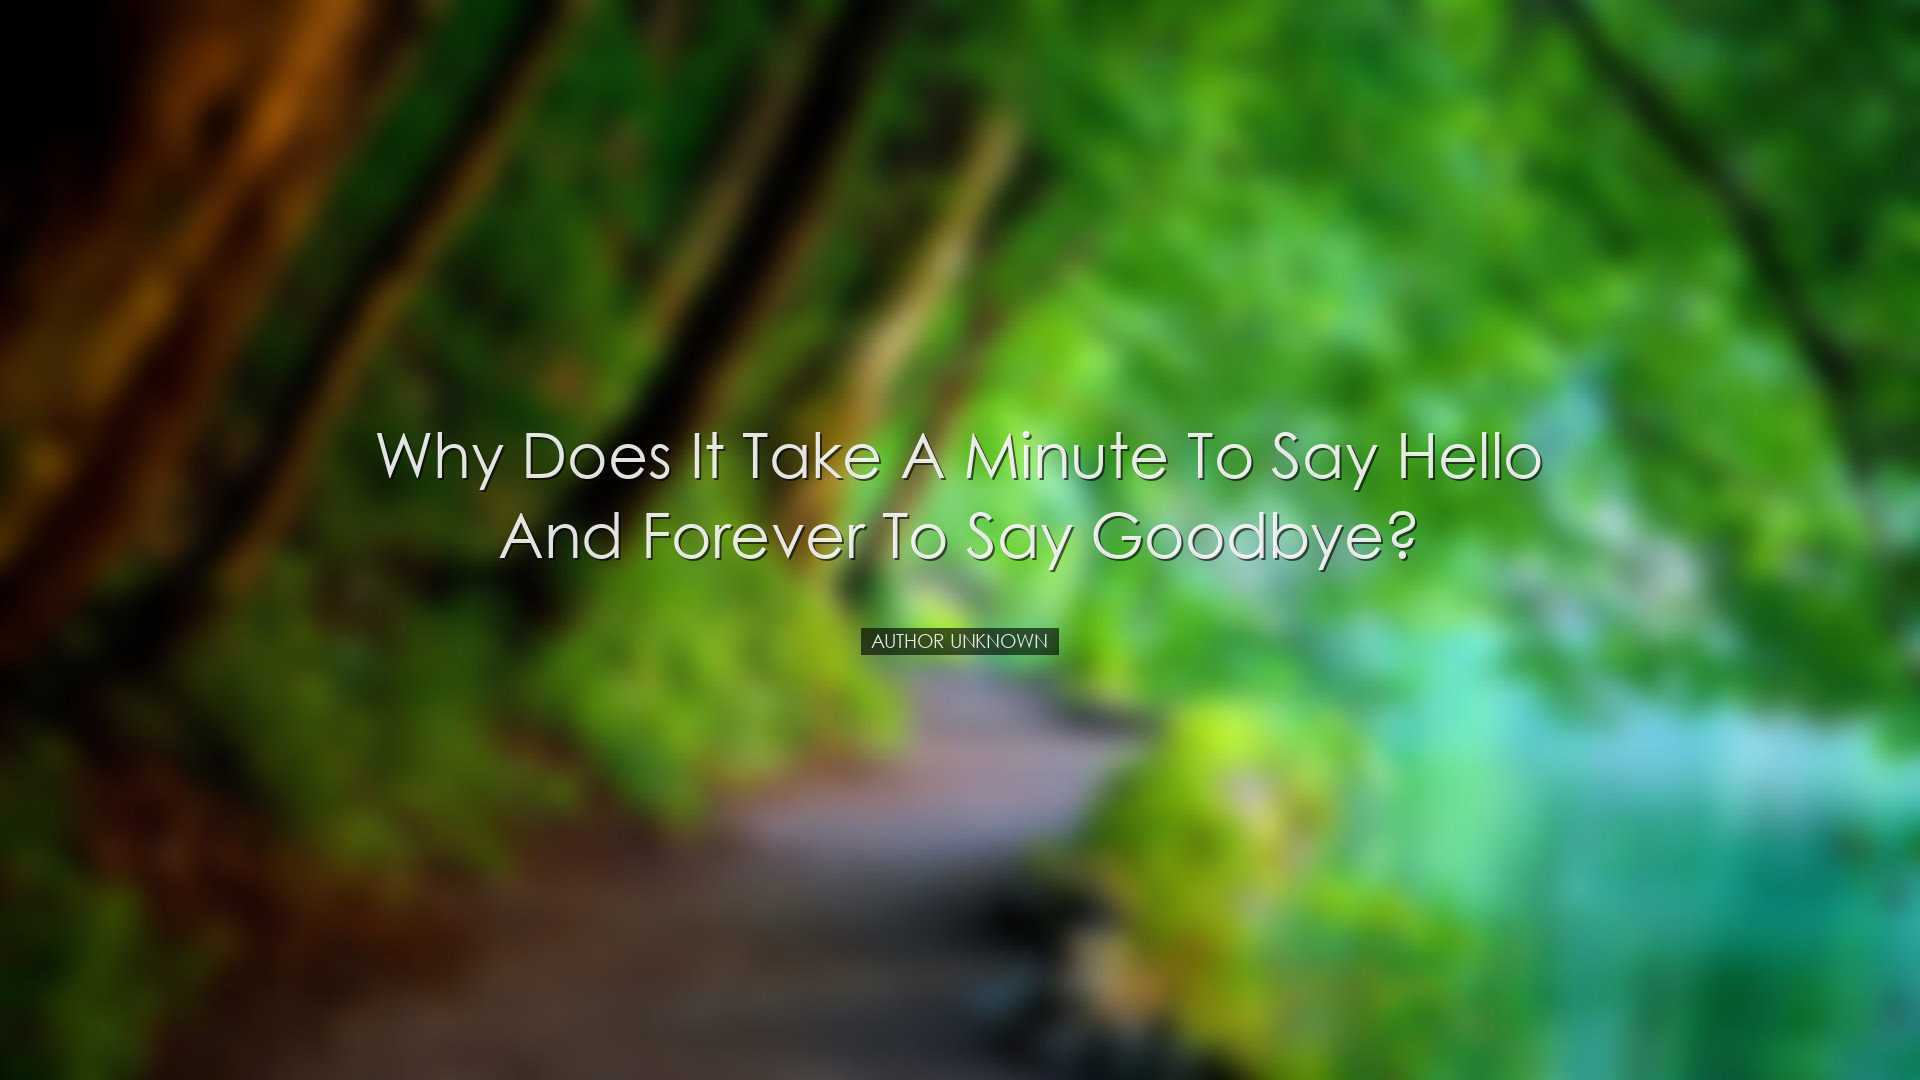 Why does it take a minute to say hello and forever to say goodbye?